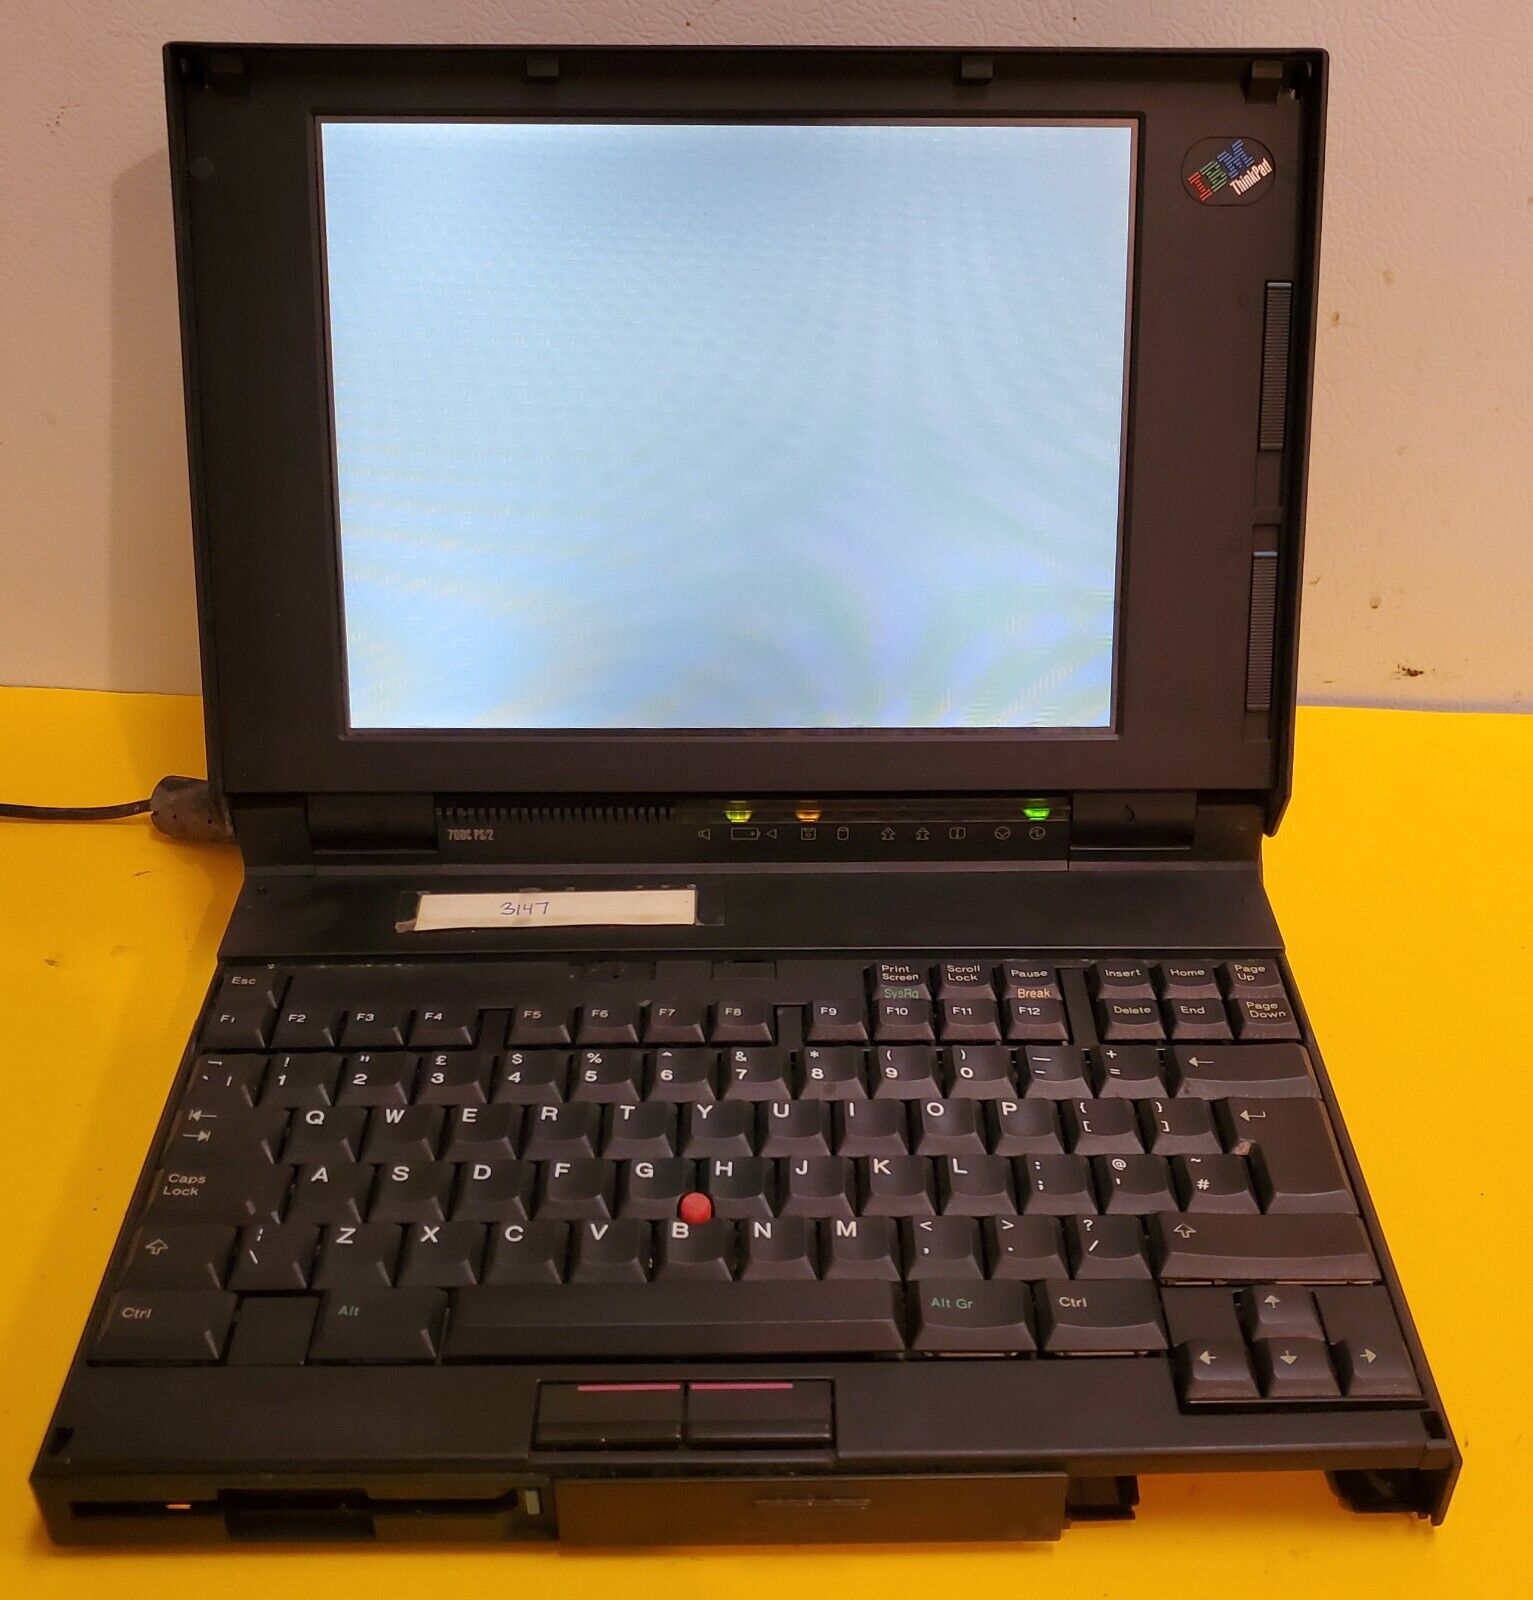 Vintage IBM THINKPAD 700C PS/2 TYPE 9552 LAPTOP COMPUTER - SOLD AS IS